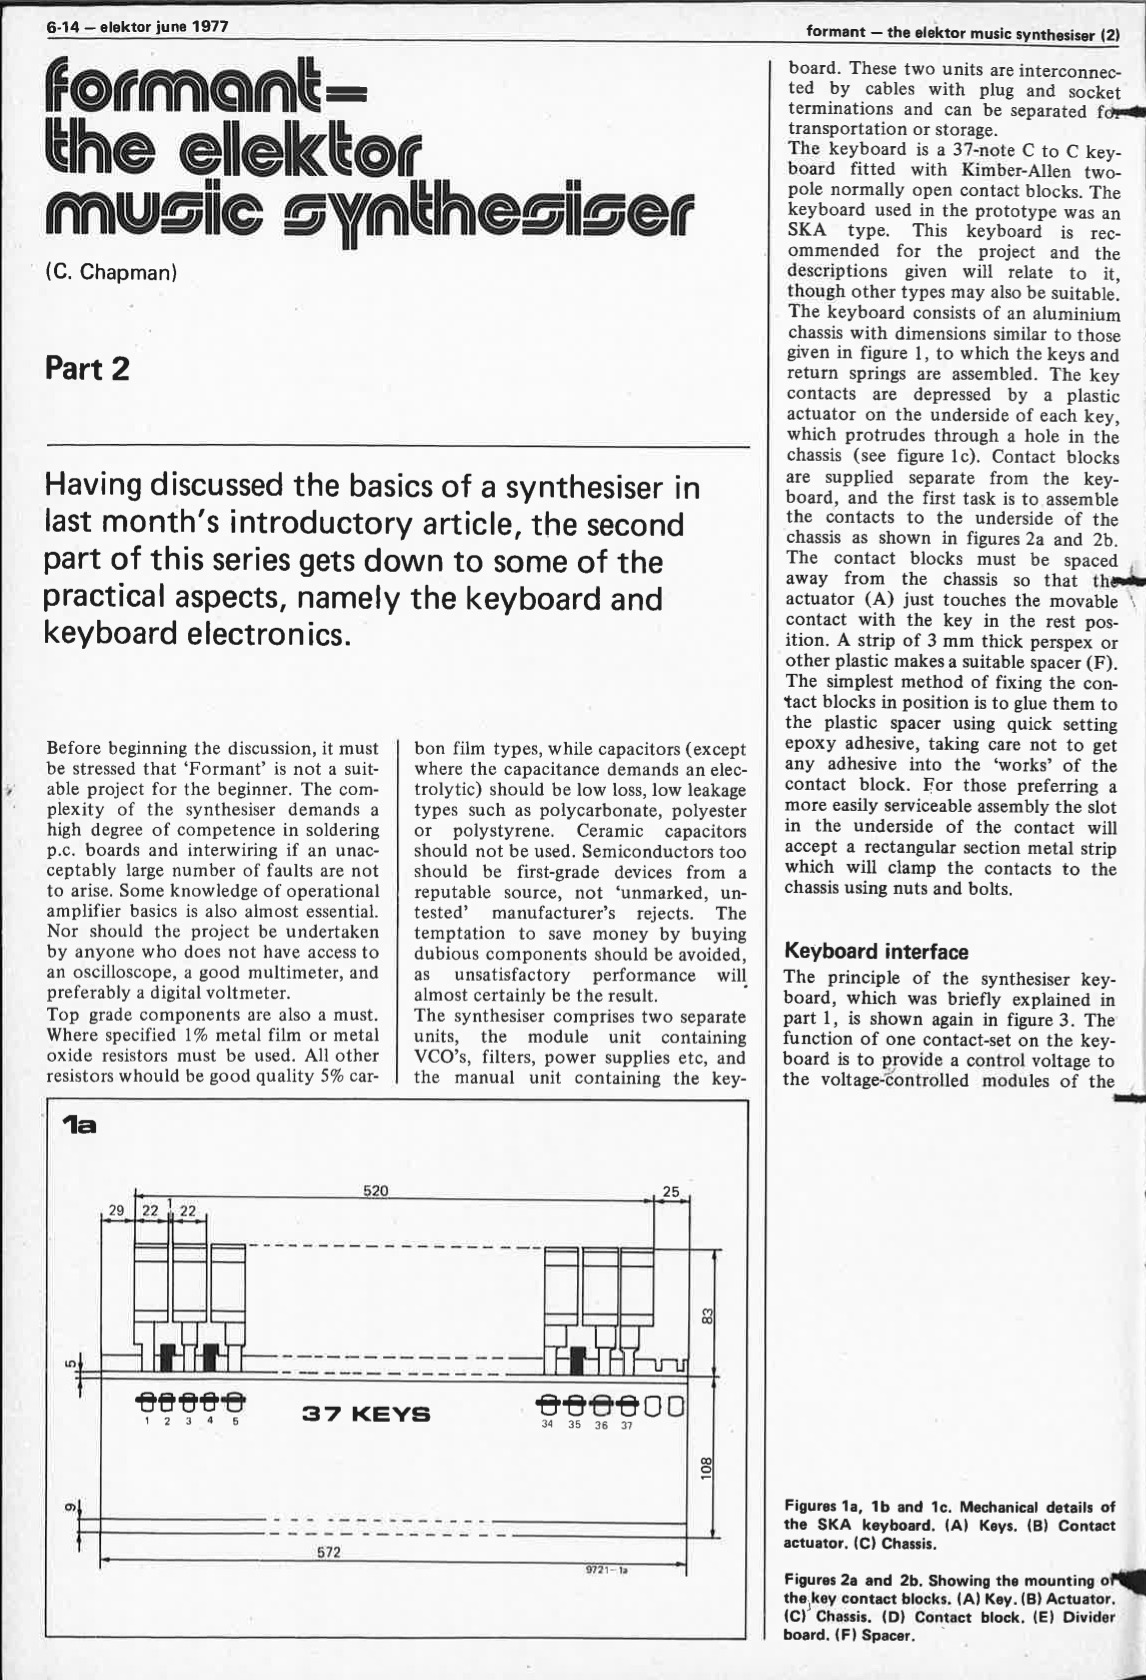 formant, the elektor music synthesizer (2)